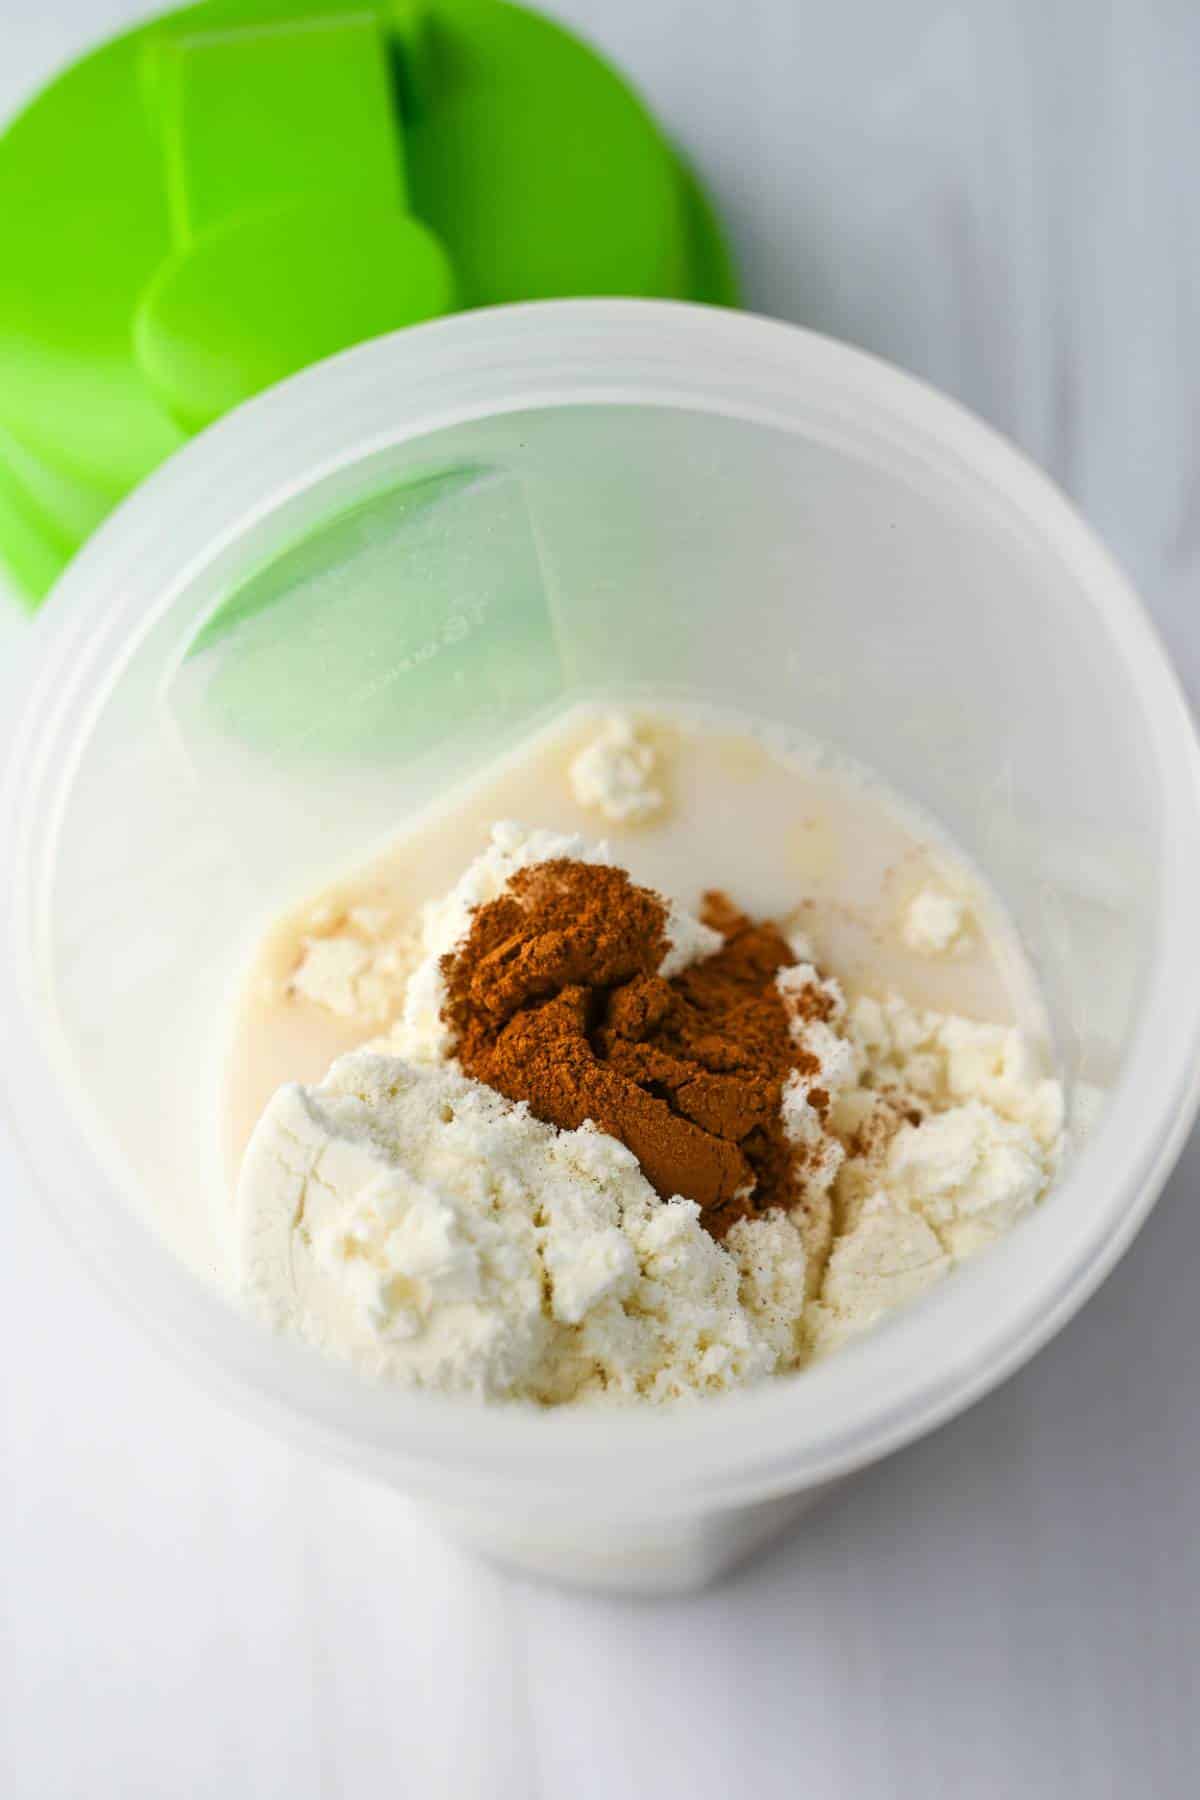 shaker bottle with whey, cinnamon, and almond milk ready to mix